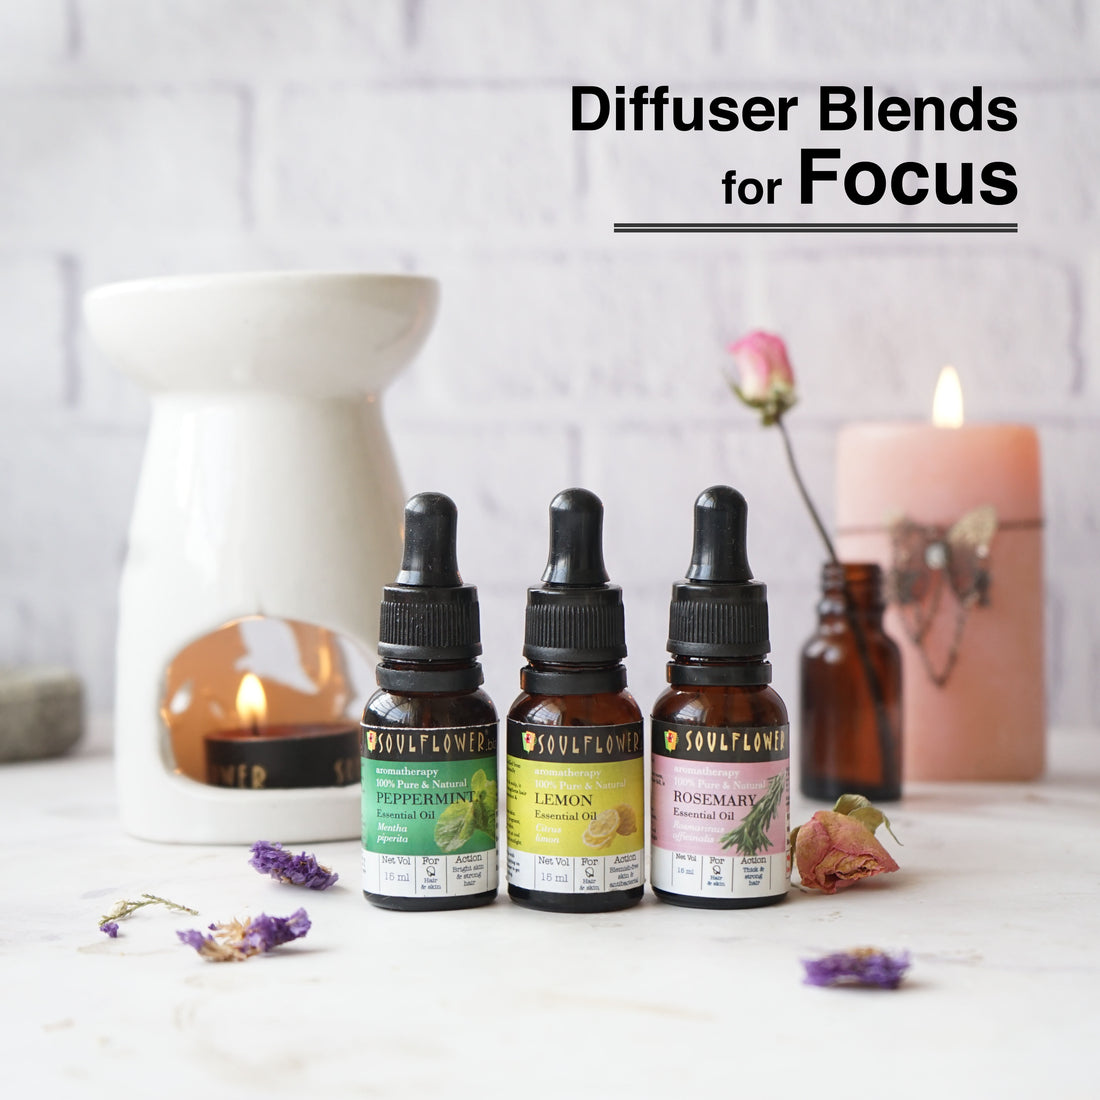 Diffuser Blends for Focus